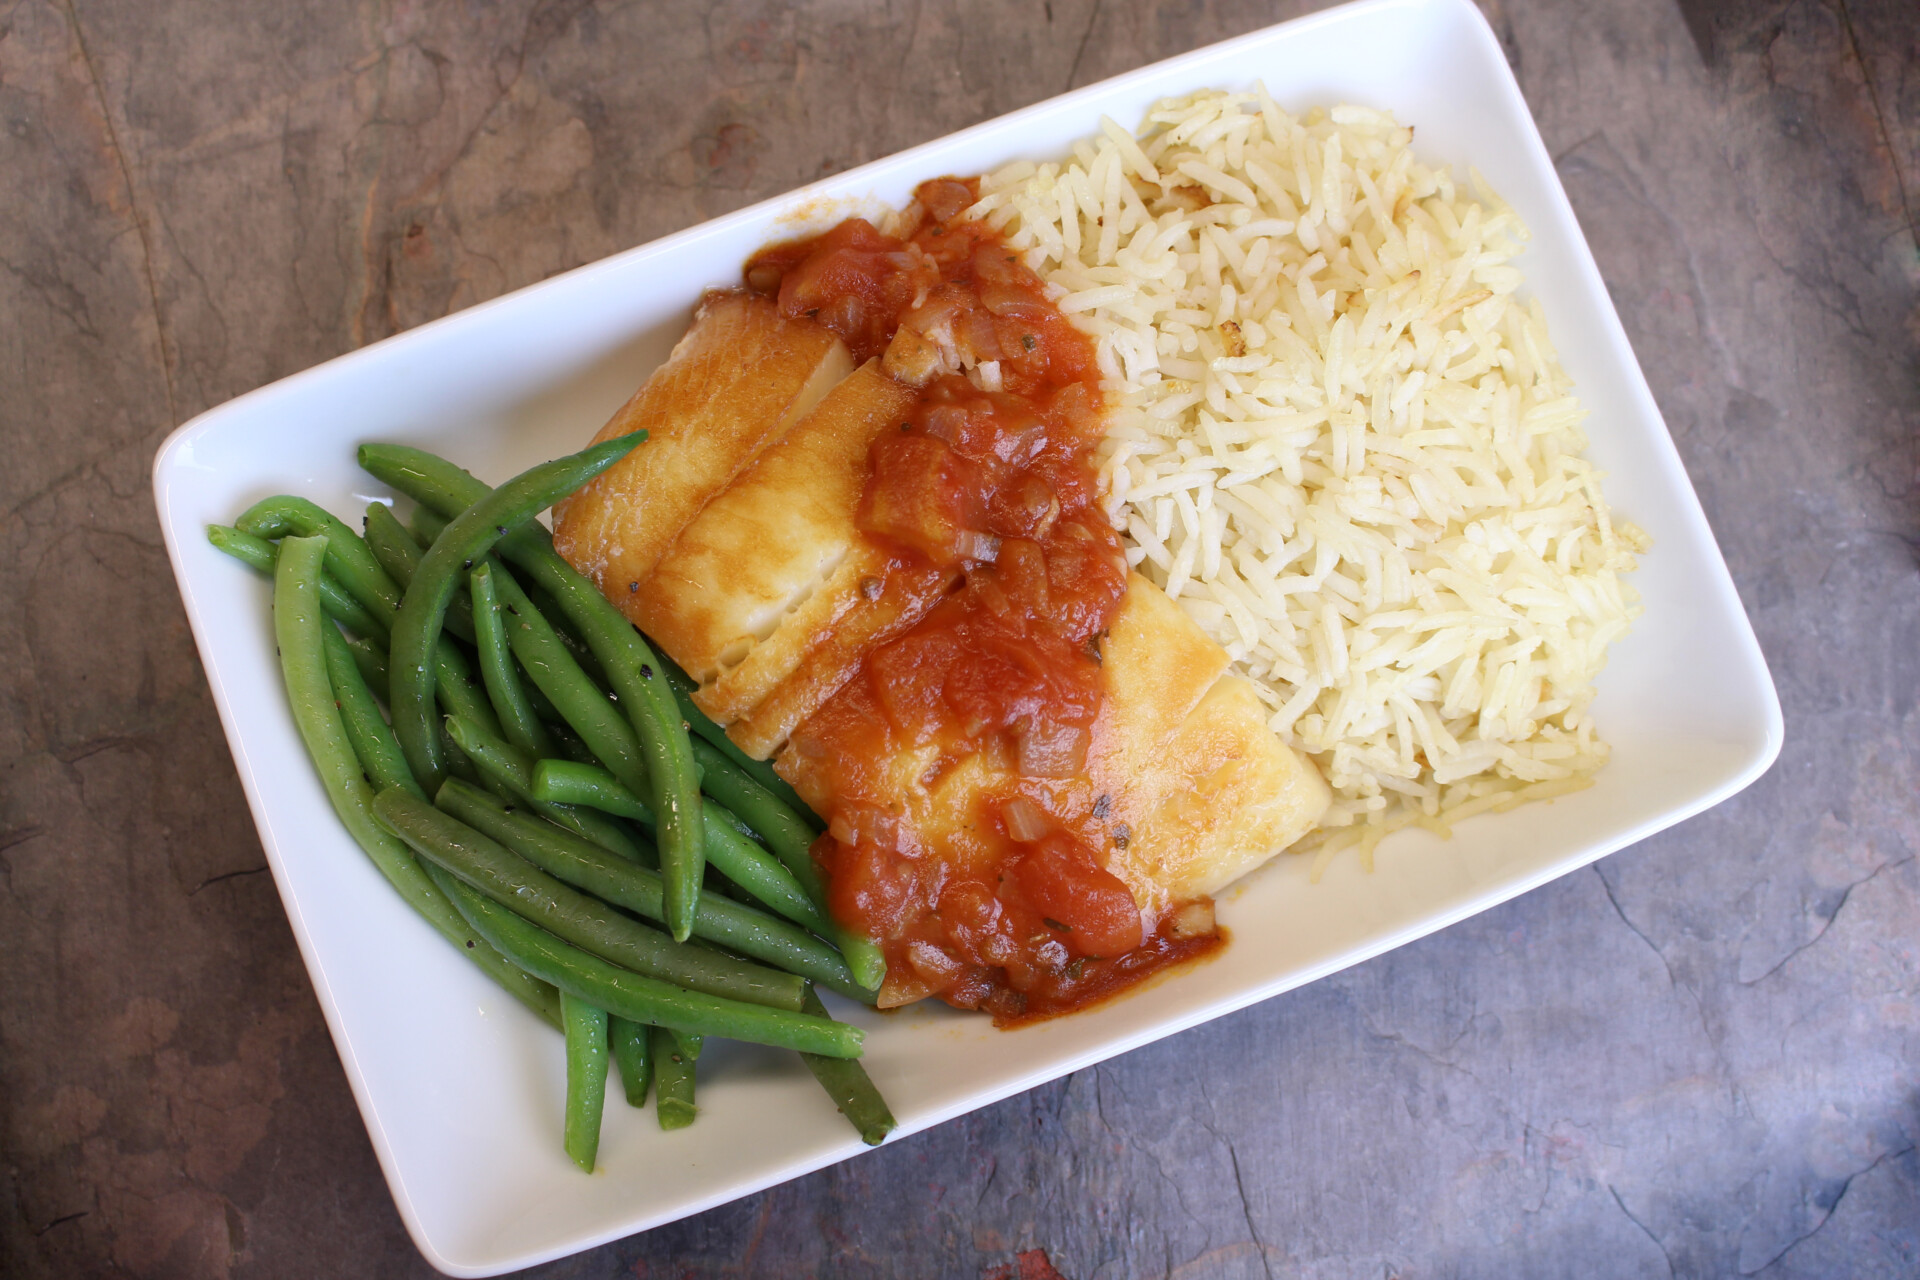 Smoky tomato sauce over turbot with green beans and rice